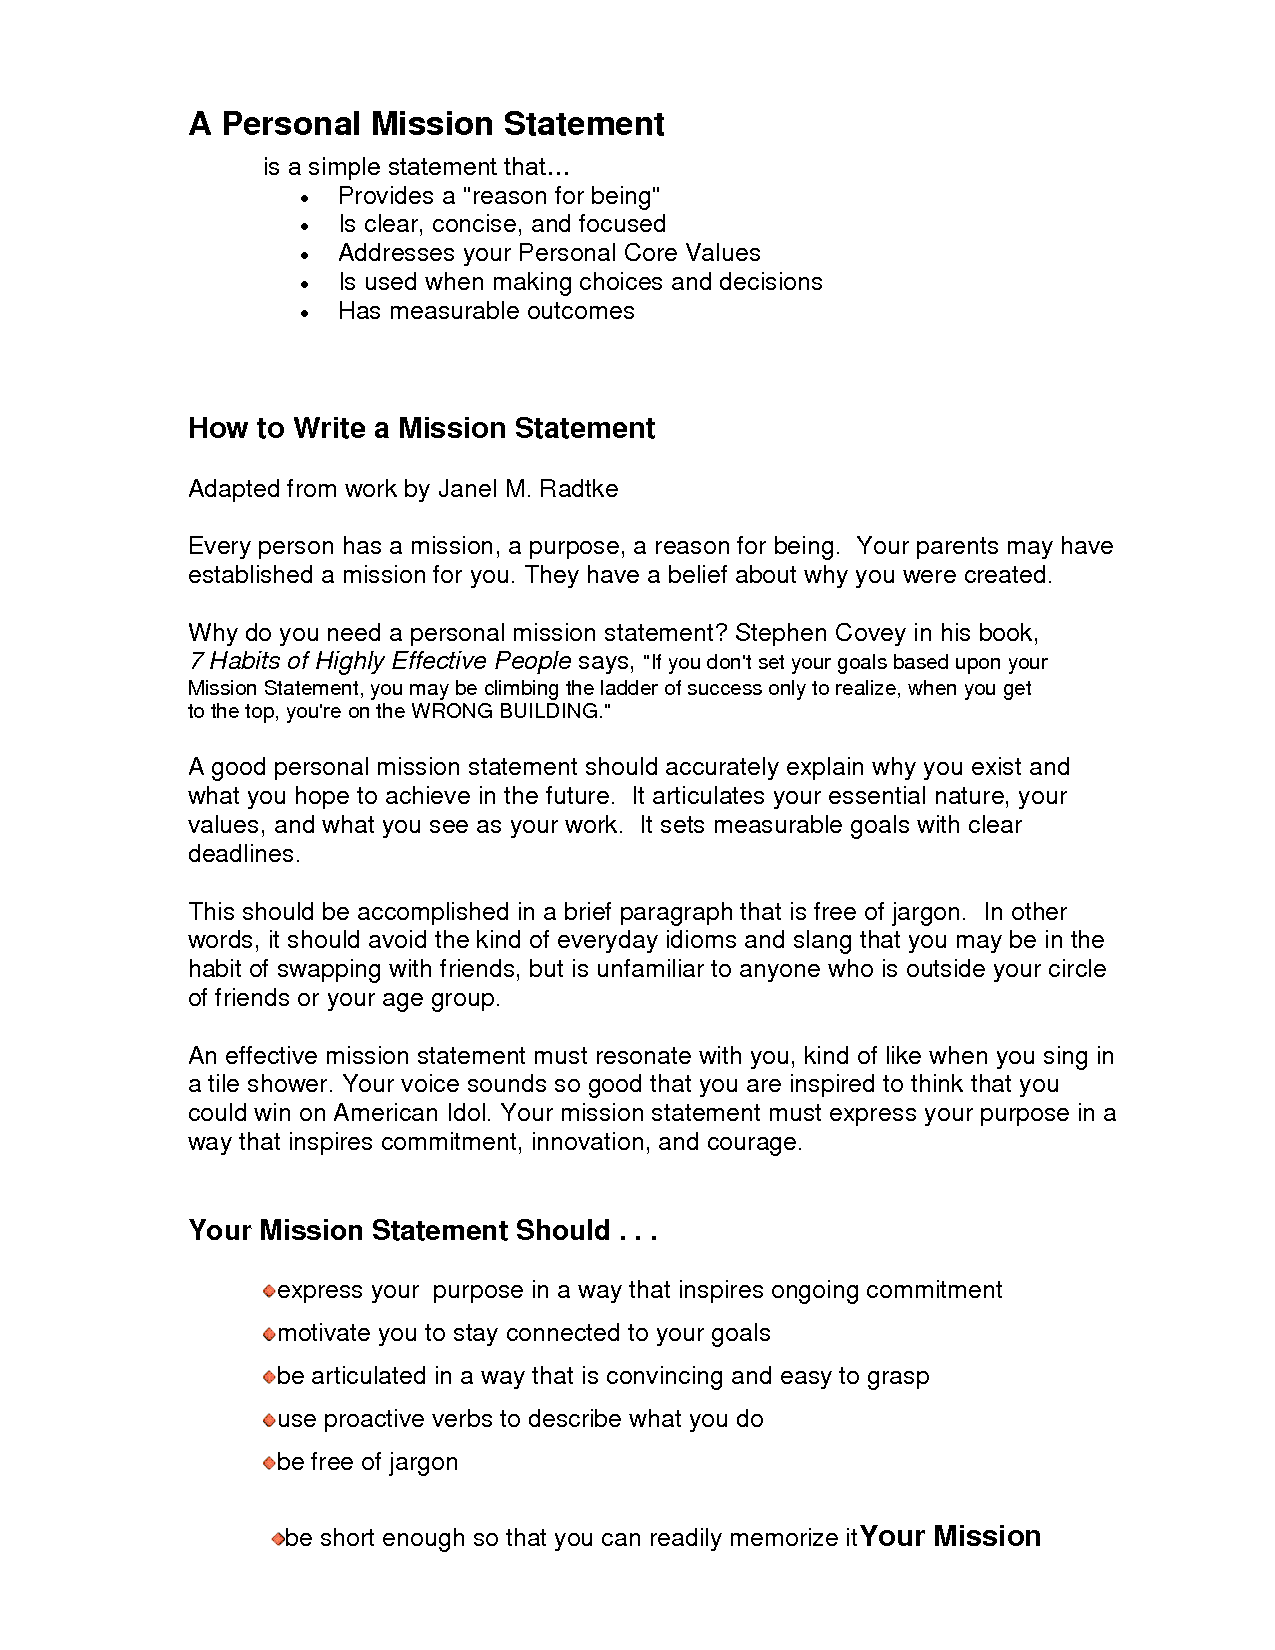 Assistance writing a personal statement